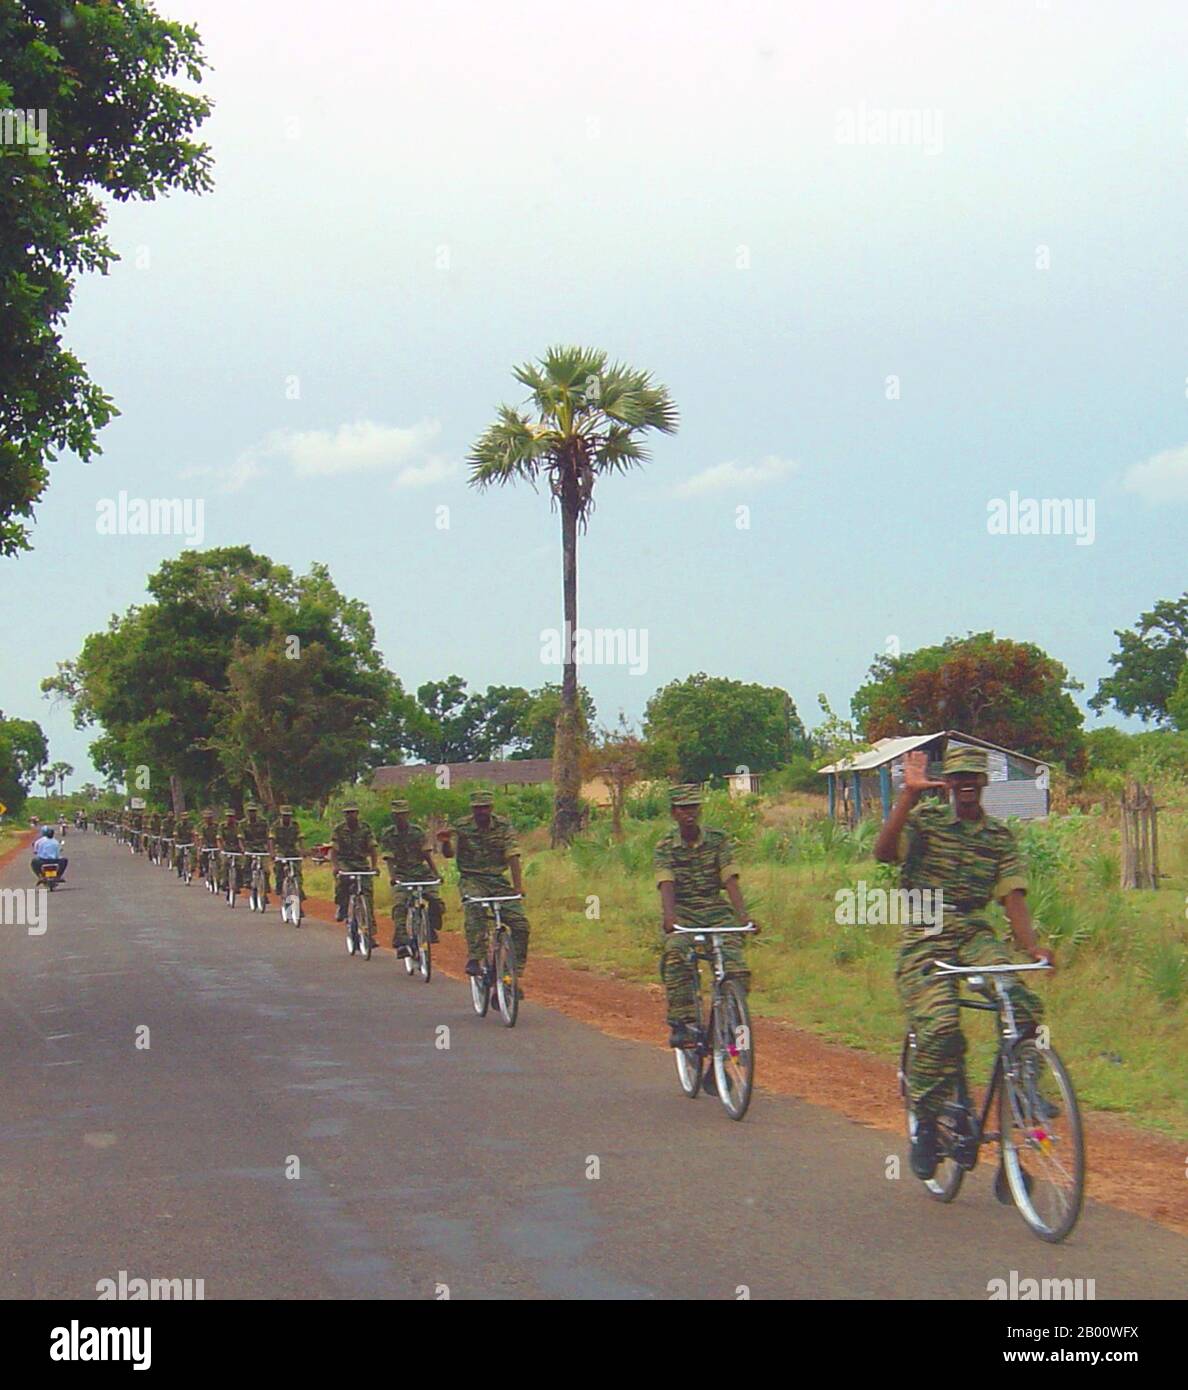 Sri Lanka: A Tamil Tiger (LTTE) bicycle platoon near Kilinochchi, May 2004. Photo by Qz10 (CC BY-SA 3.0 License).  The Sri Lankan Civil War began on July 23, 1983, and quickly developed into an on-and-off insurgency against the Colombo government by the Liberation Tigers of Tamil Eelam (LTTE), commonly known as the Tamil Tigers, and other few rebel groups, which were fighting to create an independent Tamil state named Tamil Eelam in the north and the east of the island. After a 26-year military campaign, the Sri Lankan military defeated the Tamil Tigers in May 2009. Stock Photo